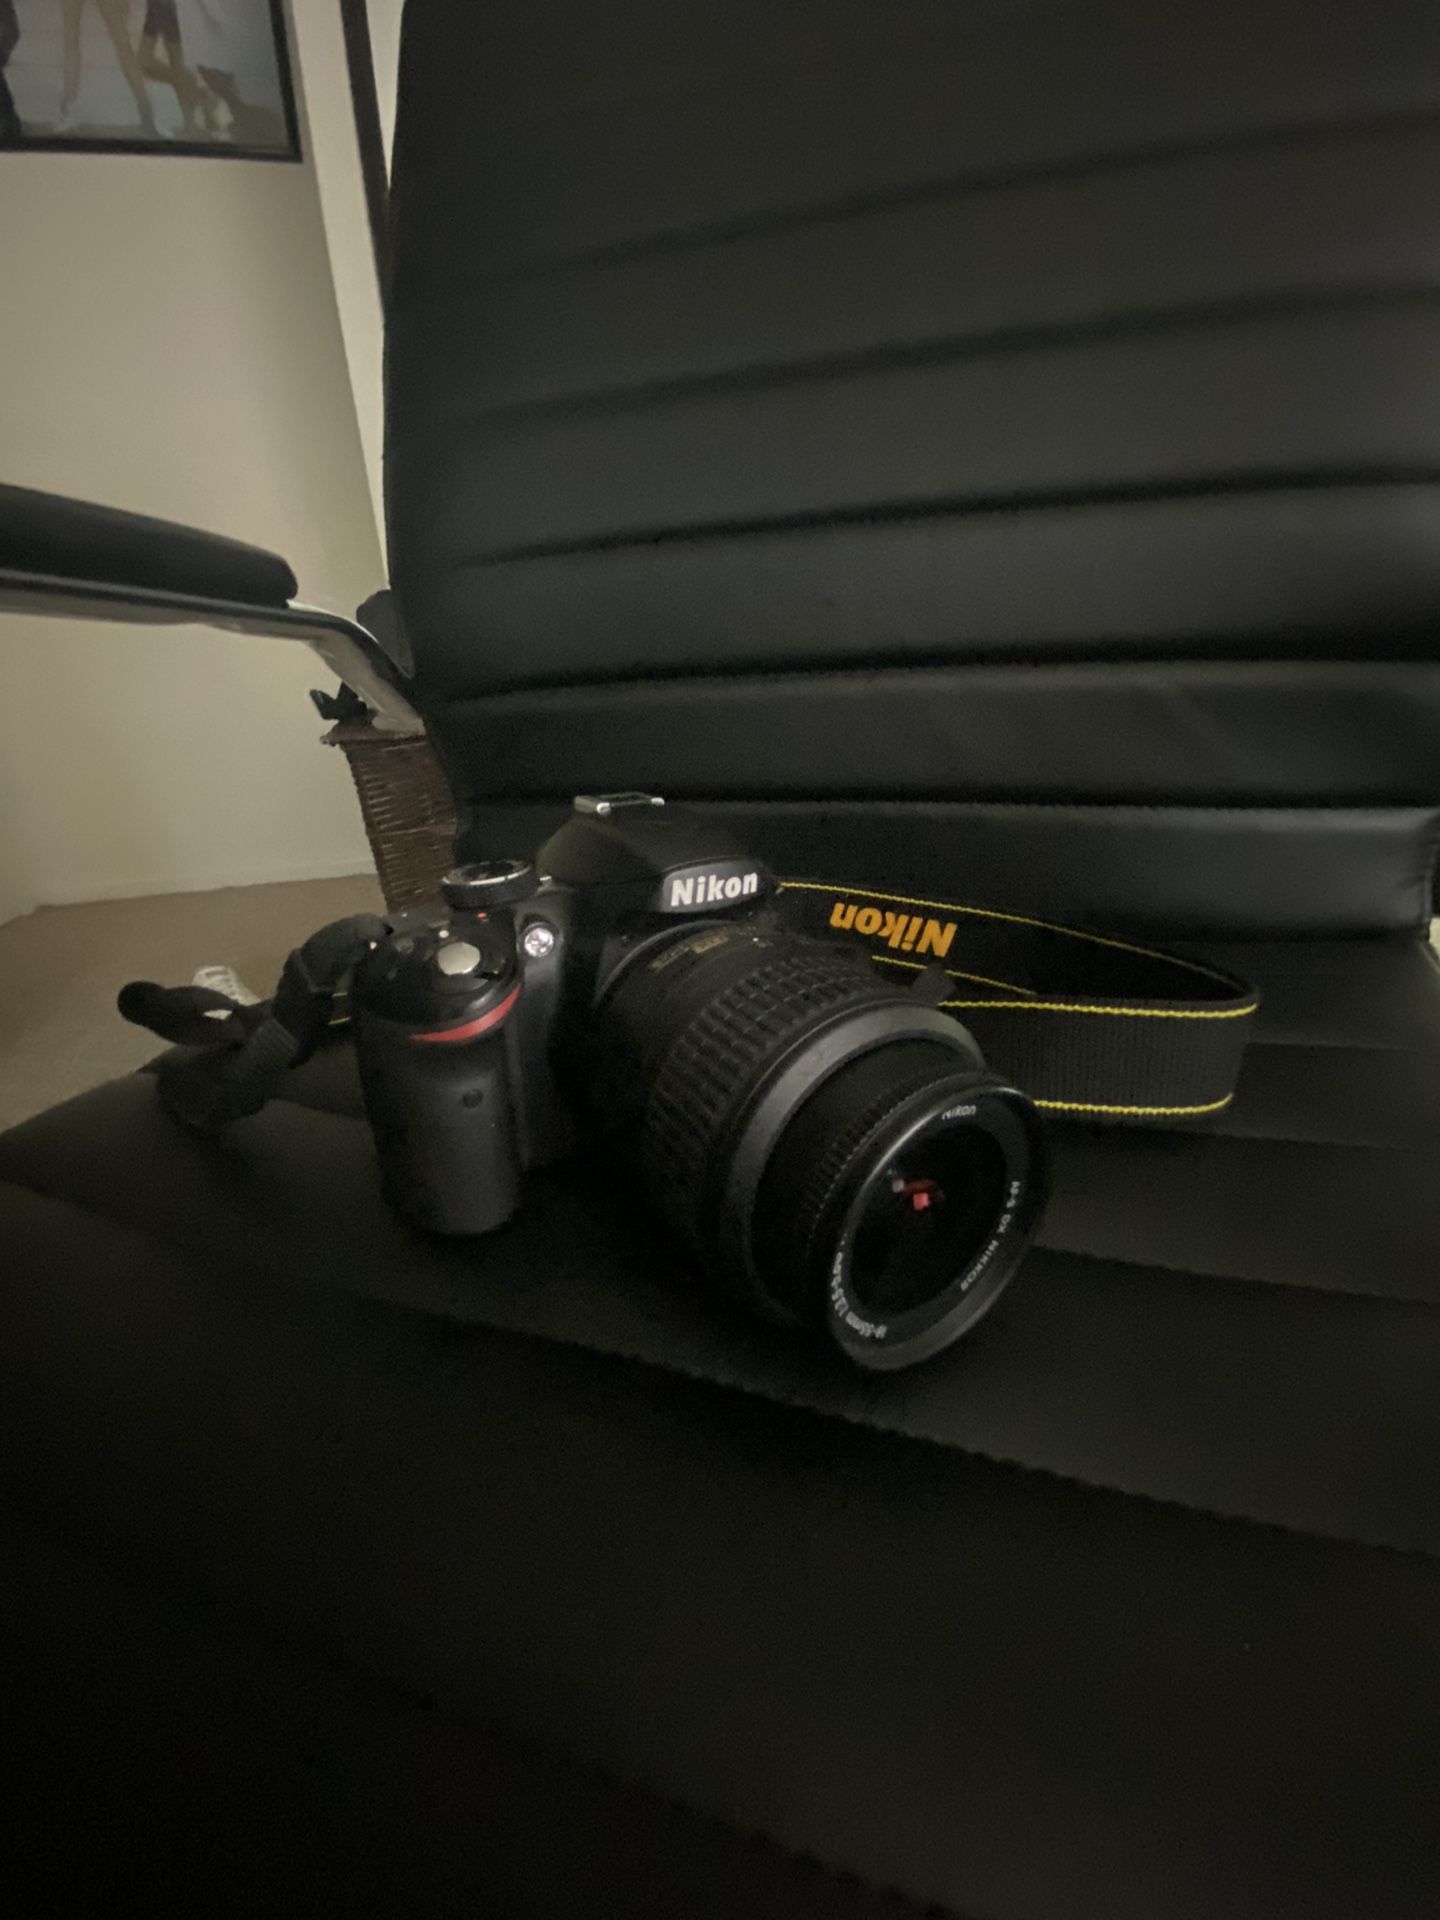 Nikon D3(contact info removed)